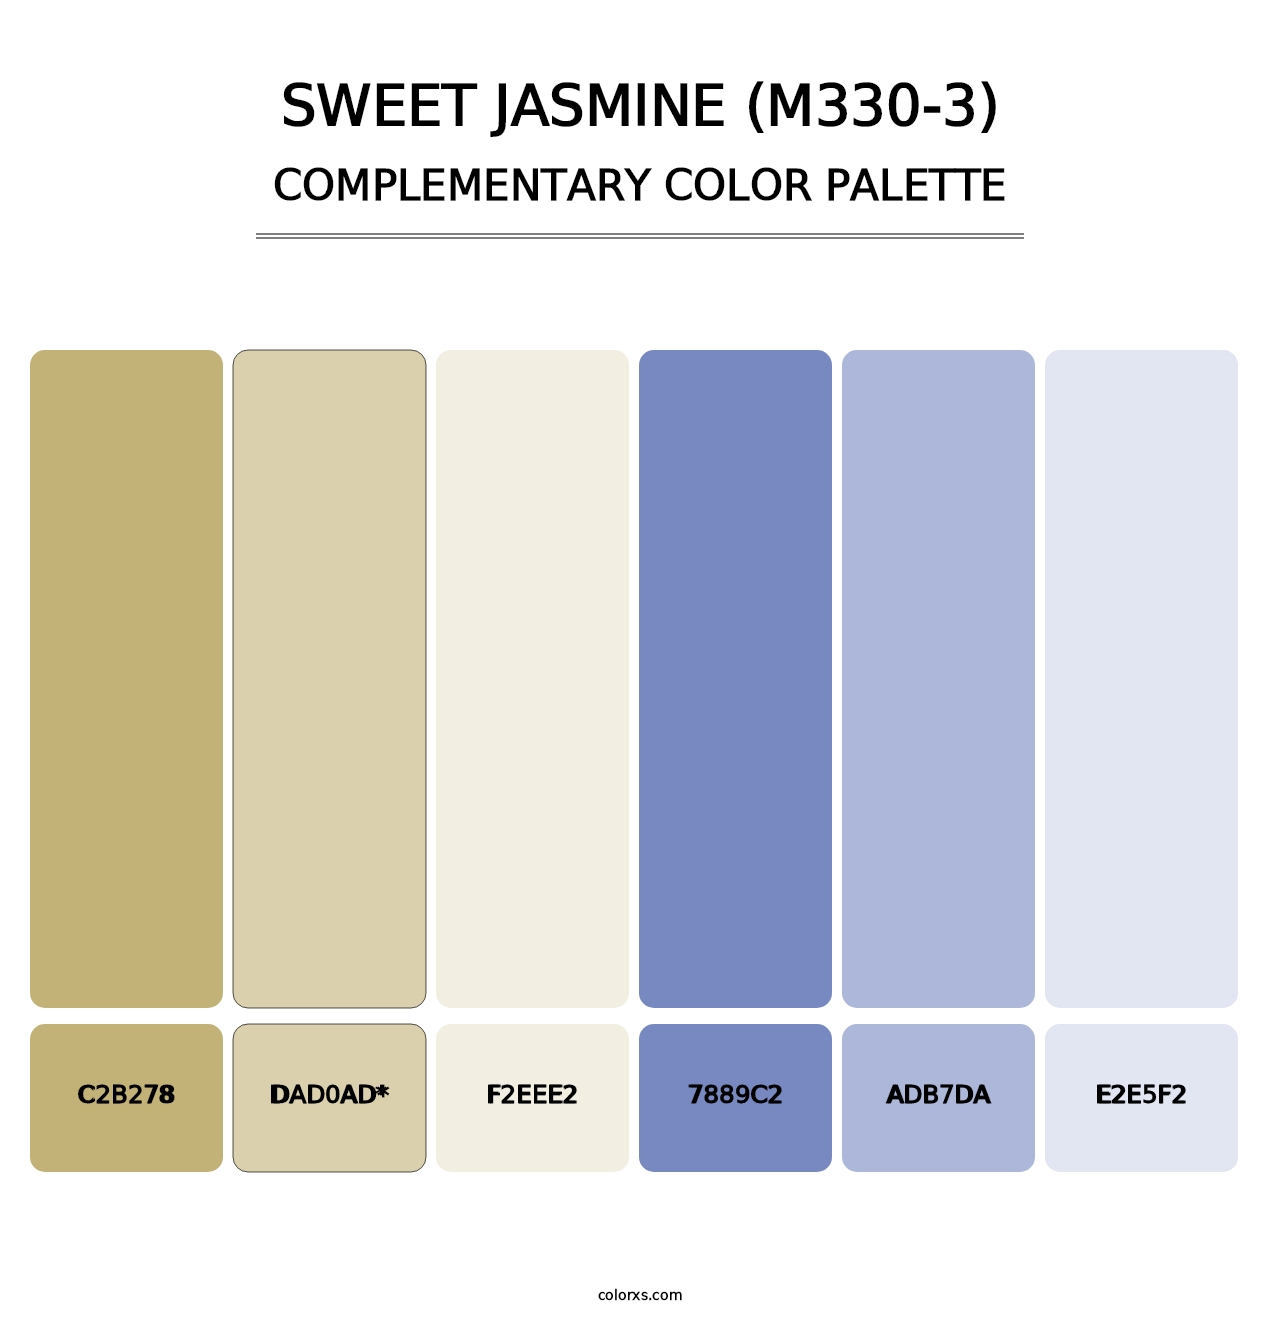 Sweet Jasmine (M330-3) - Complementary Color Palette